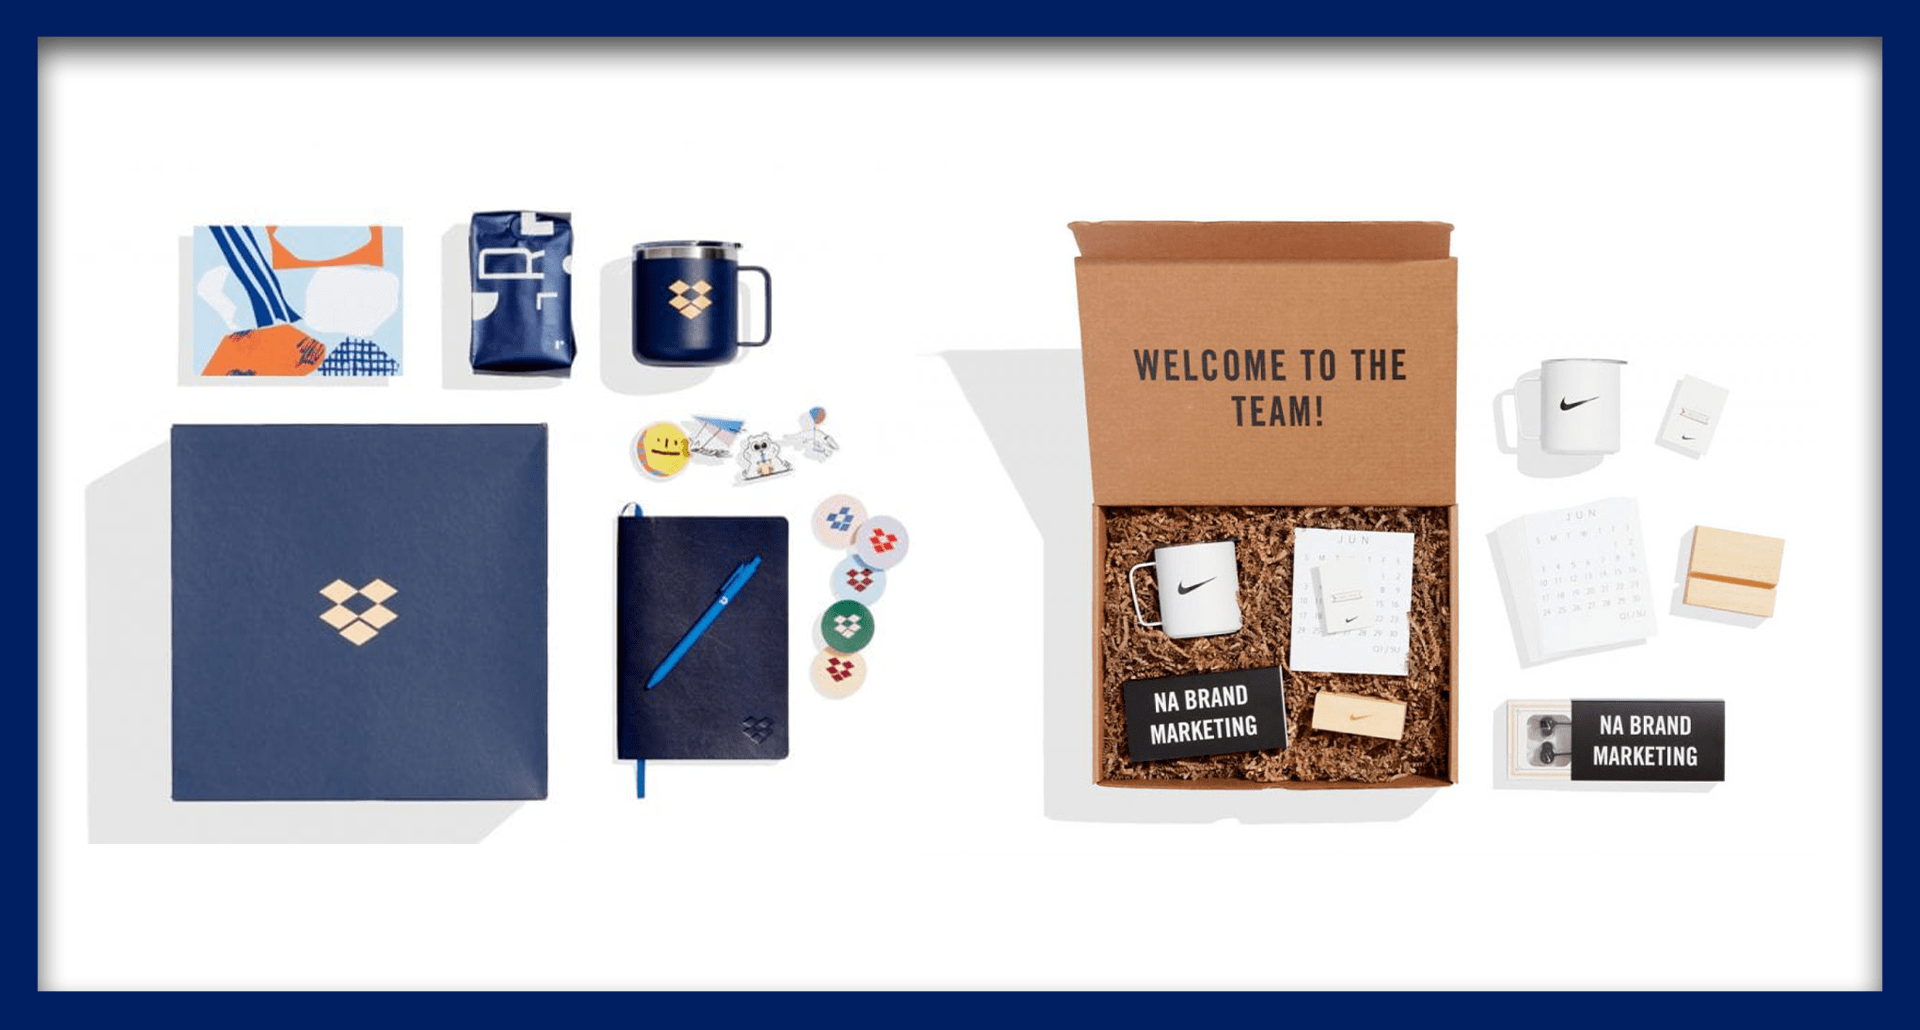 Case Study: Employee Welcome Kits - Why, What to Include, and How?